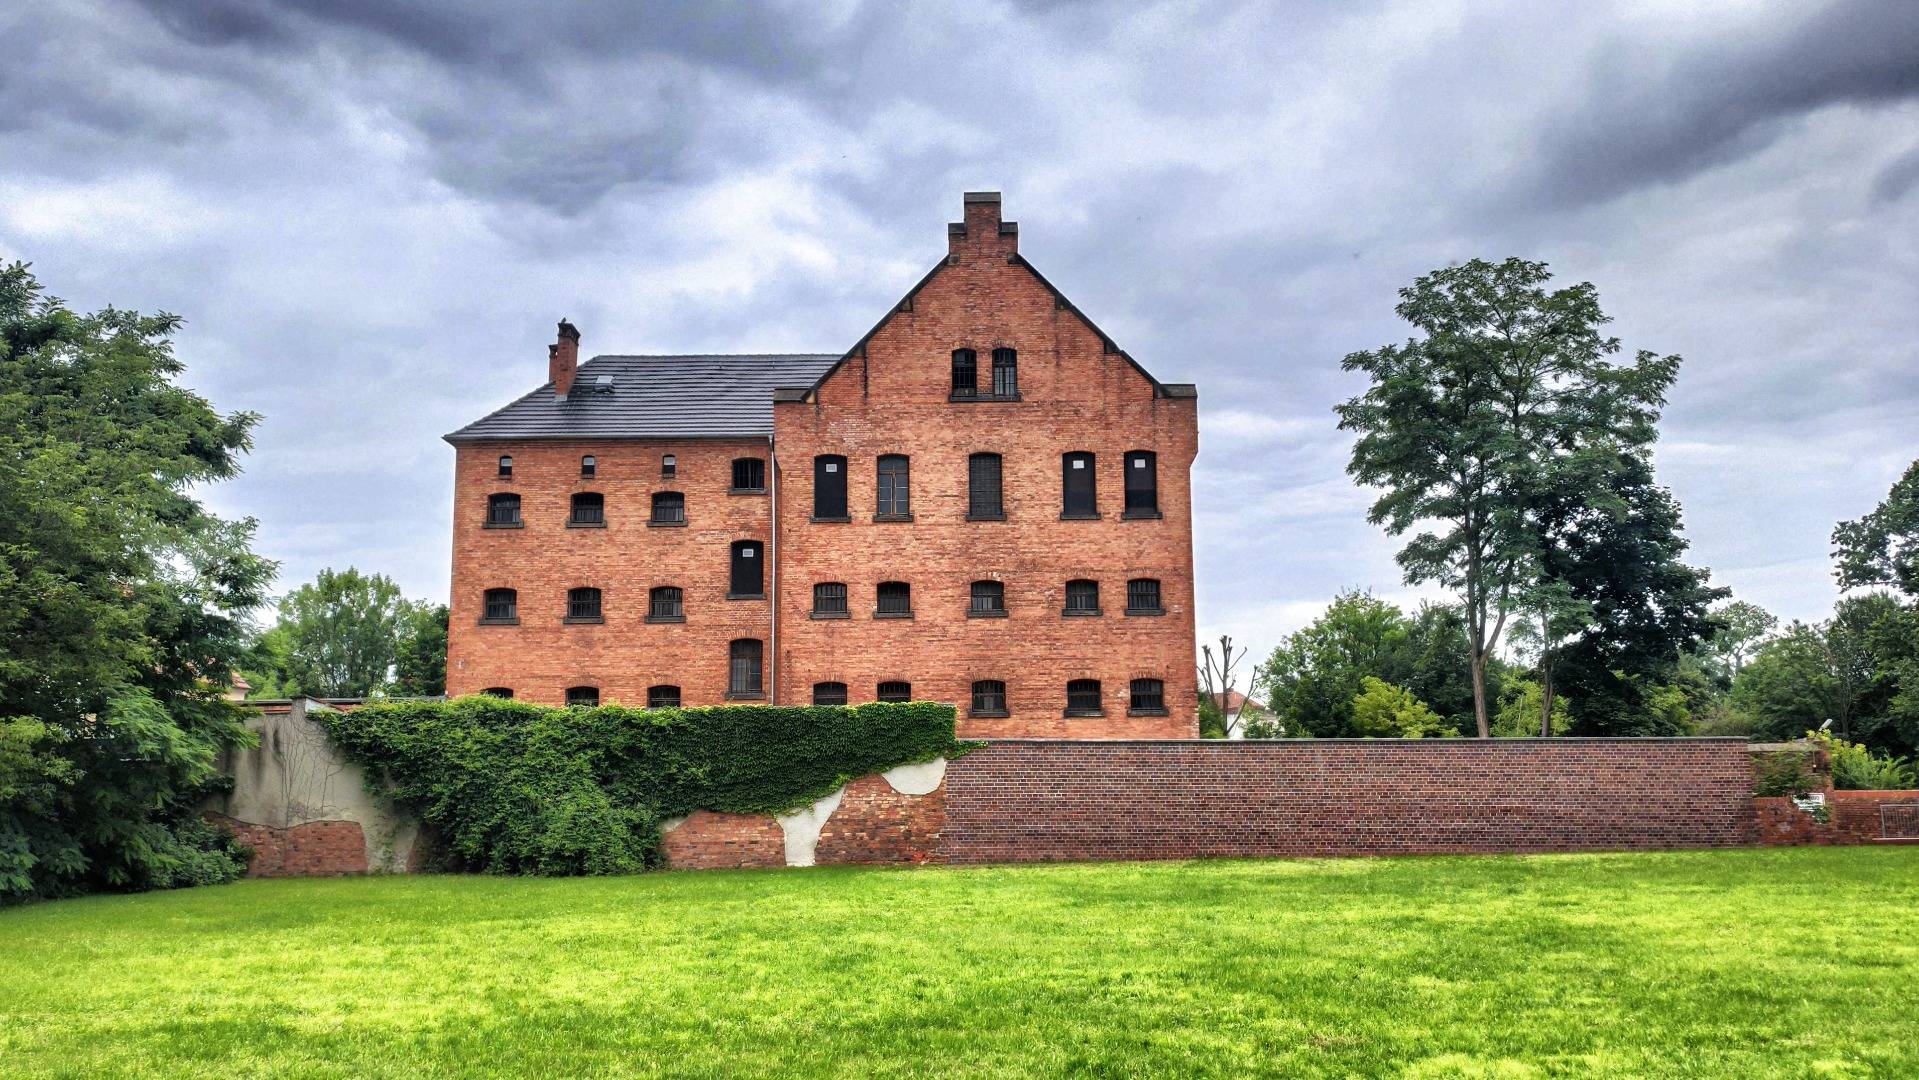 Another brick building